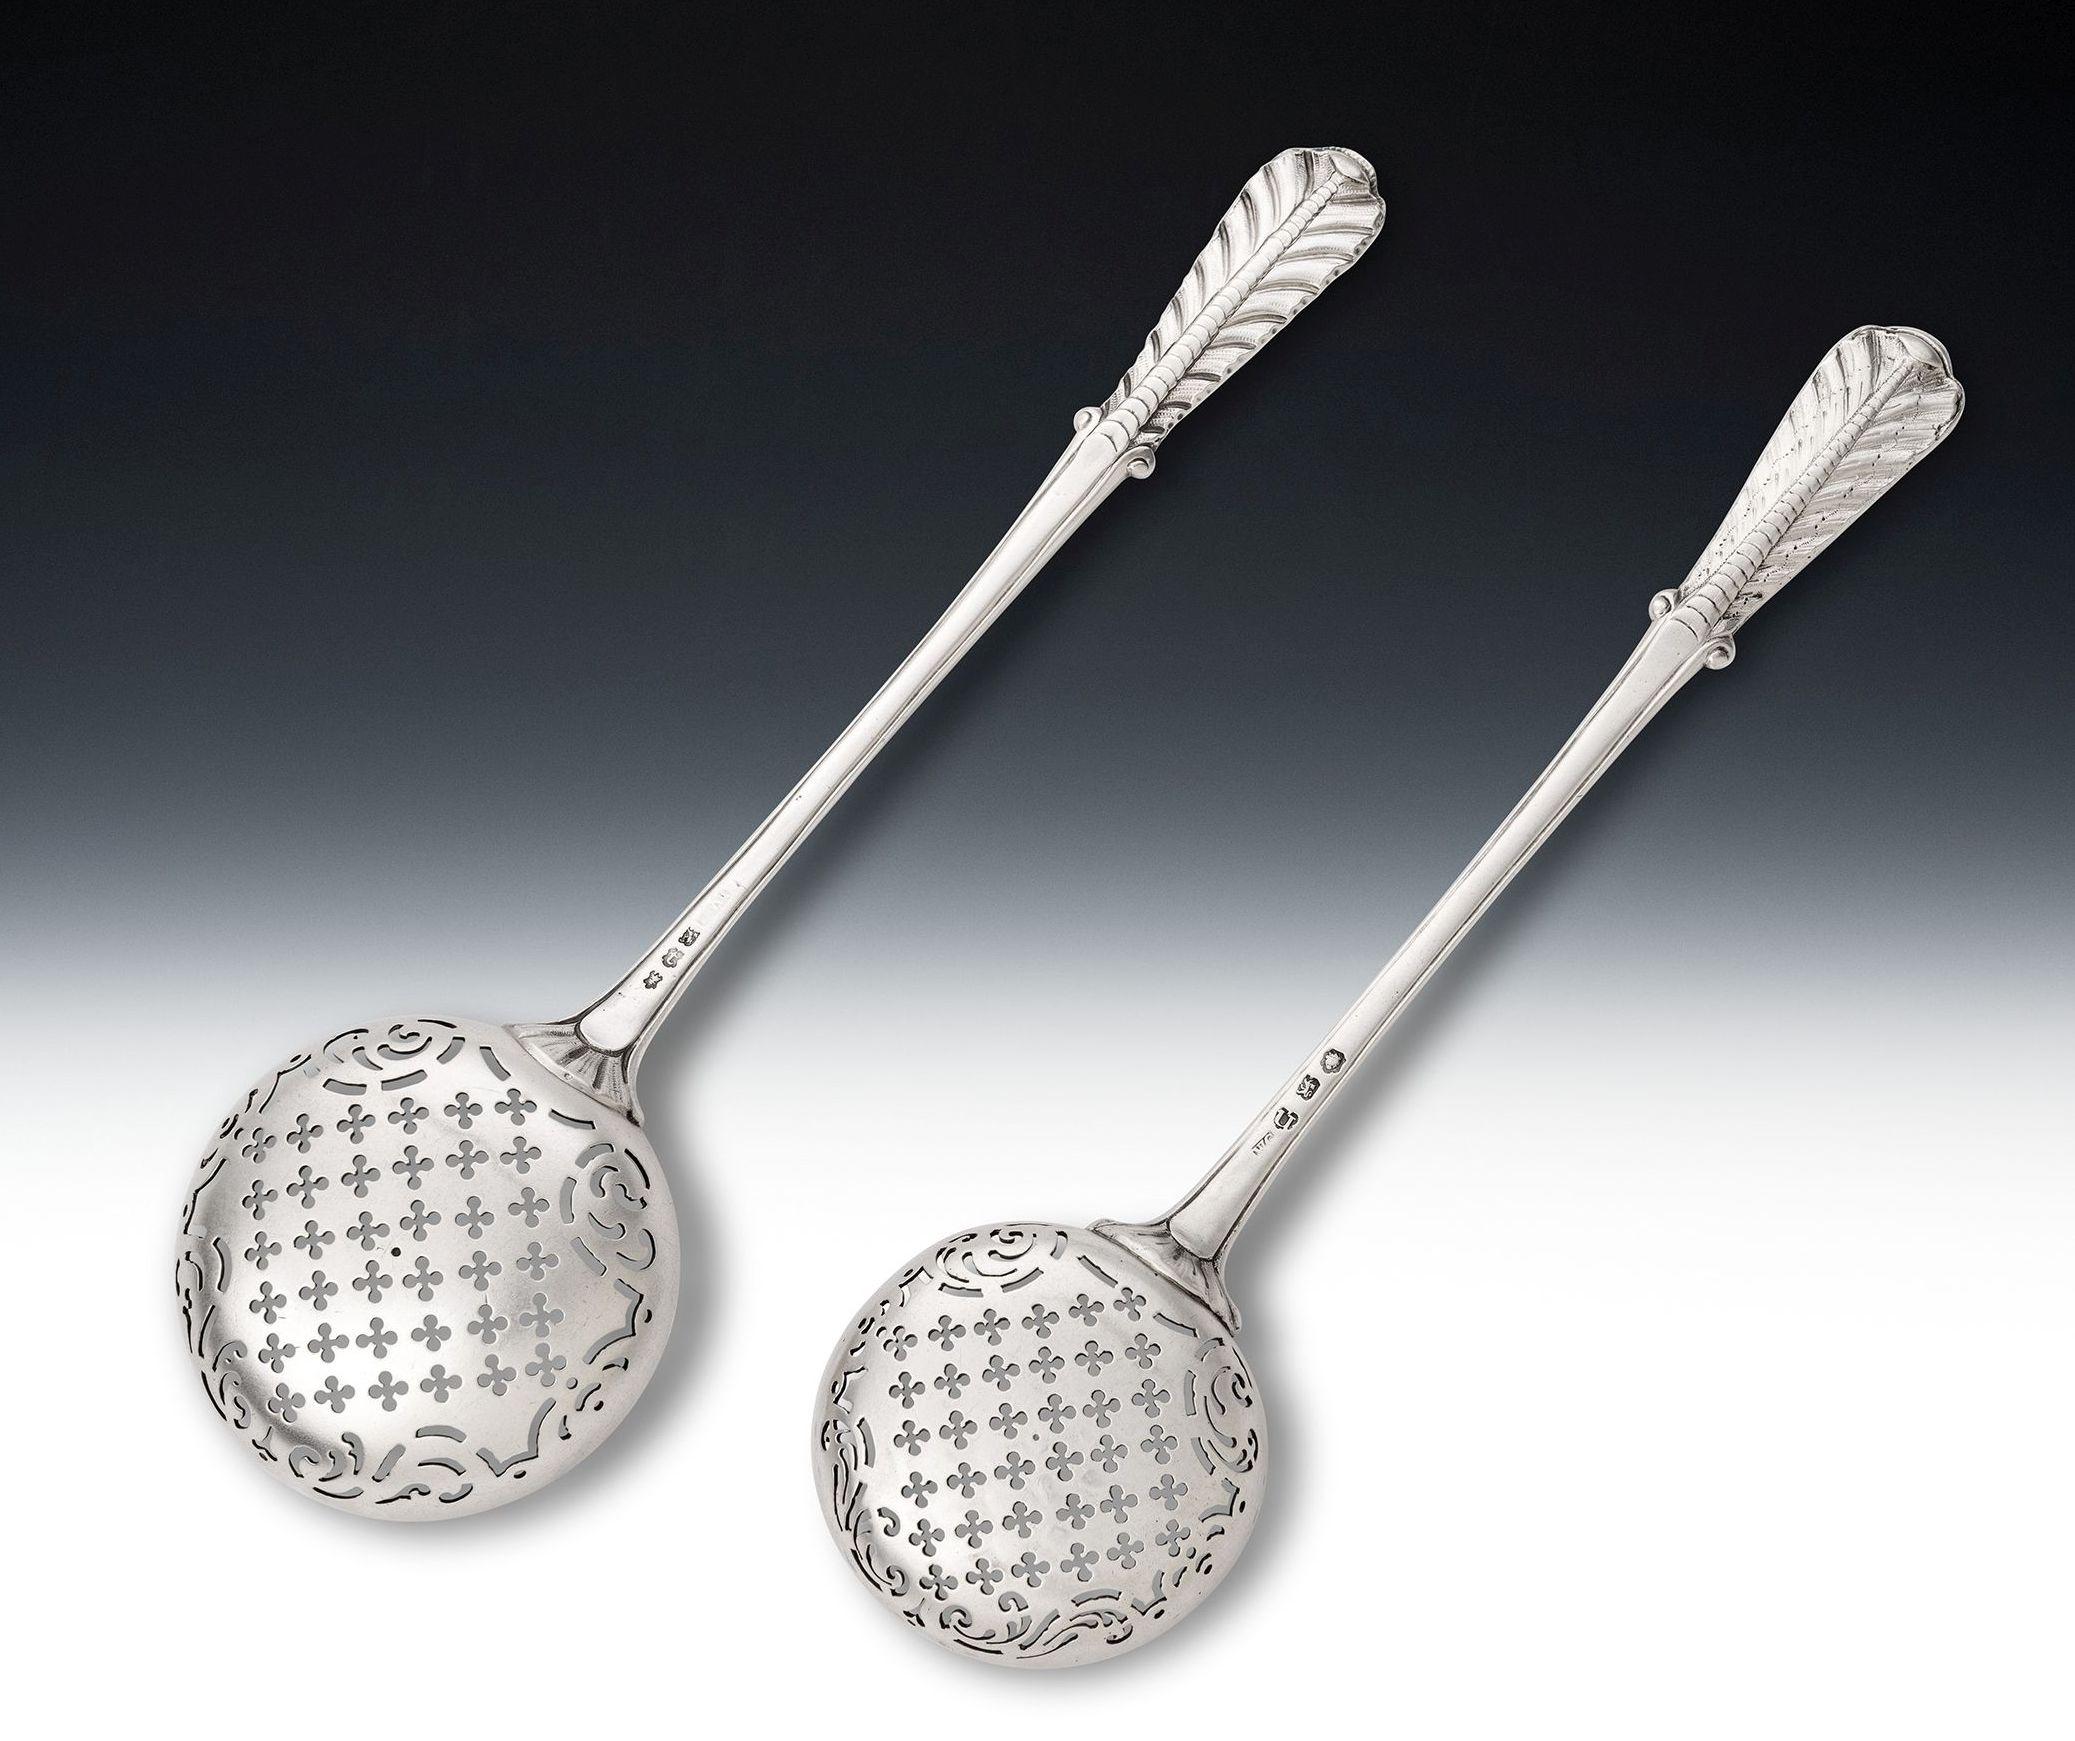 Rococo A pair of George II Cast Sifter Spoons, London, 1754/55 by William Cripps. For Sale